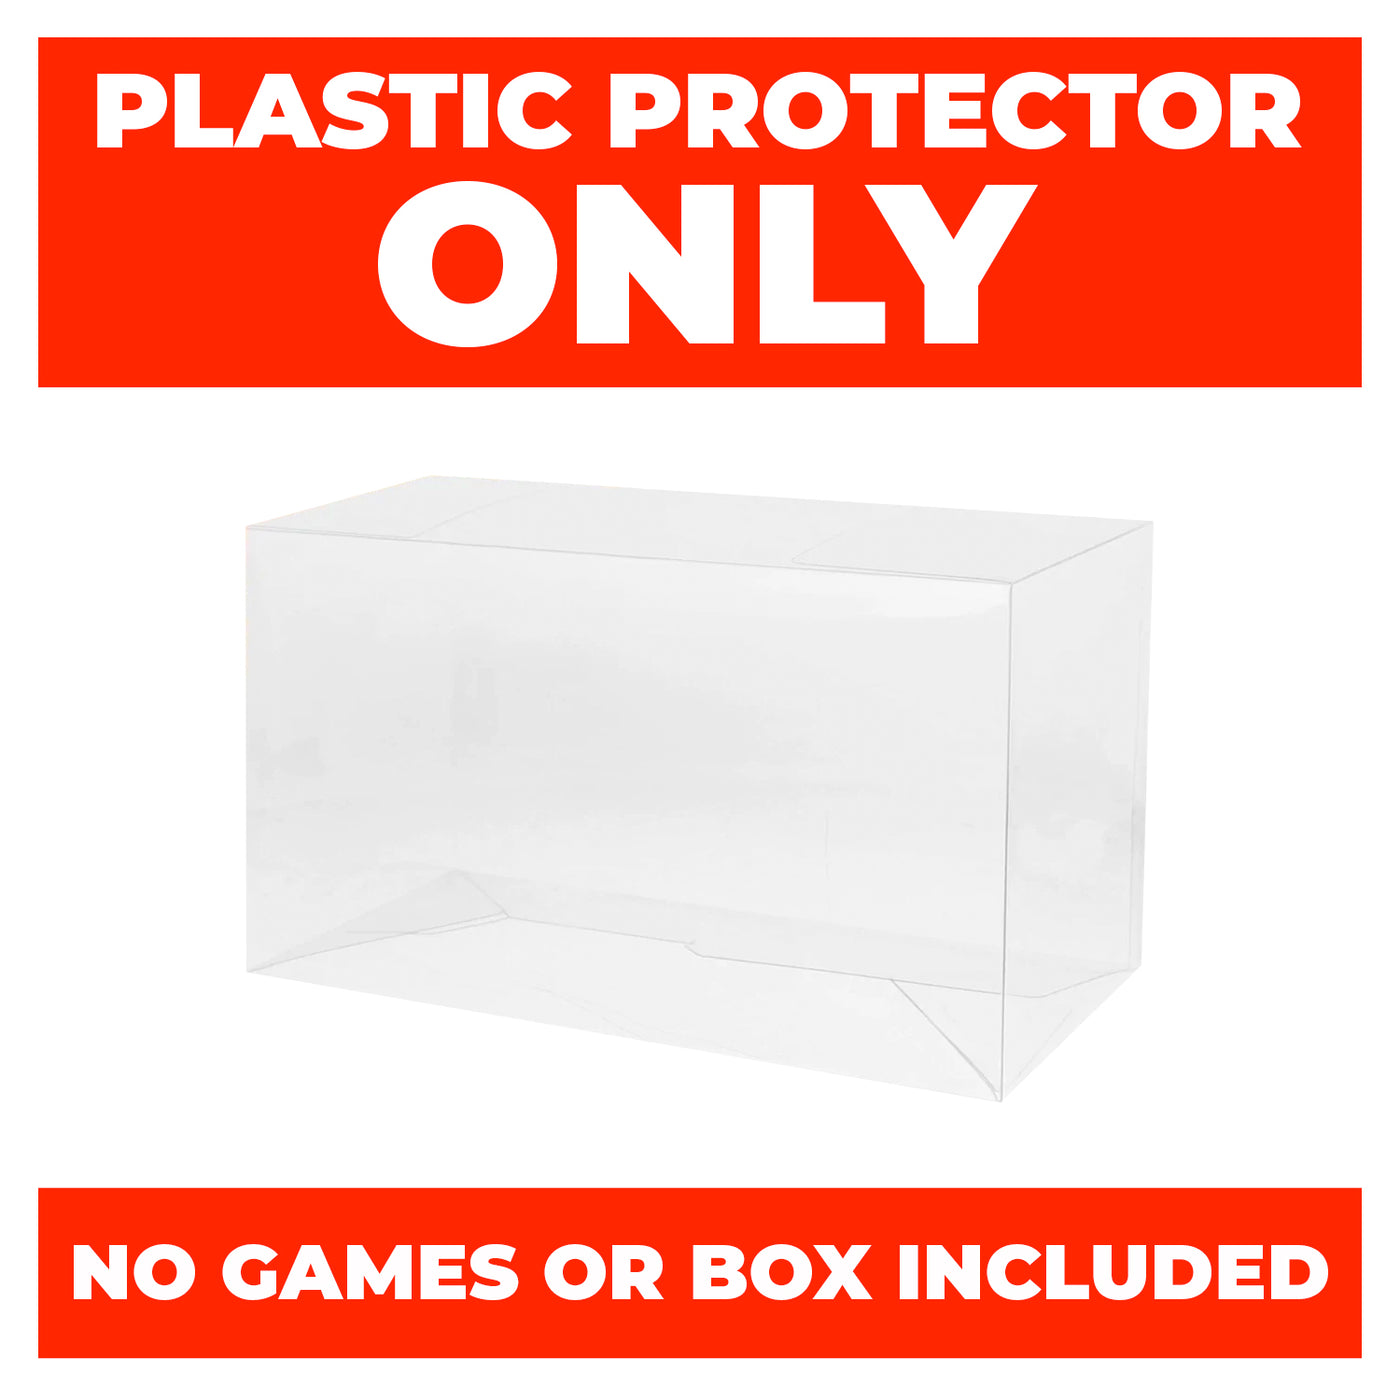 Plastic Protector for GAME CUBE Video Game Console Box 0.50mm thick, UV & Scratch Resistant on The Pop Protector Guide by Display Geek